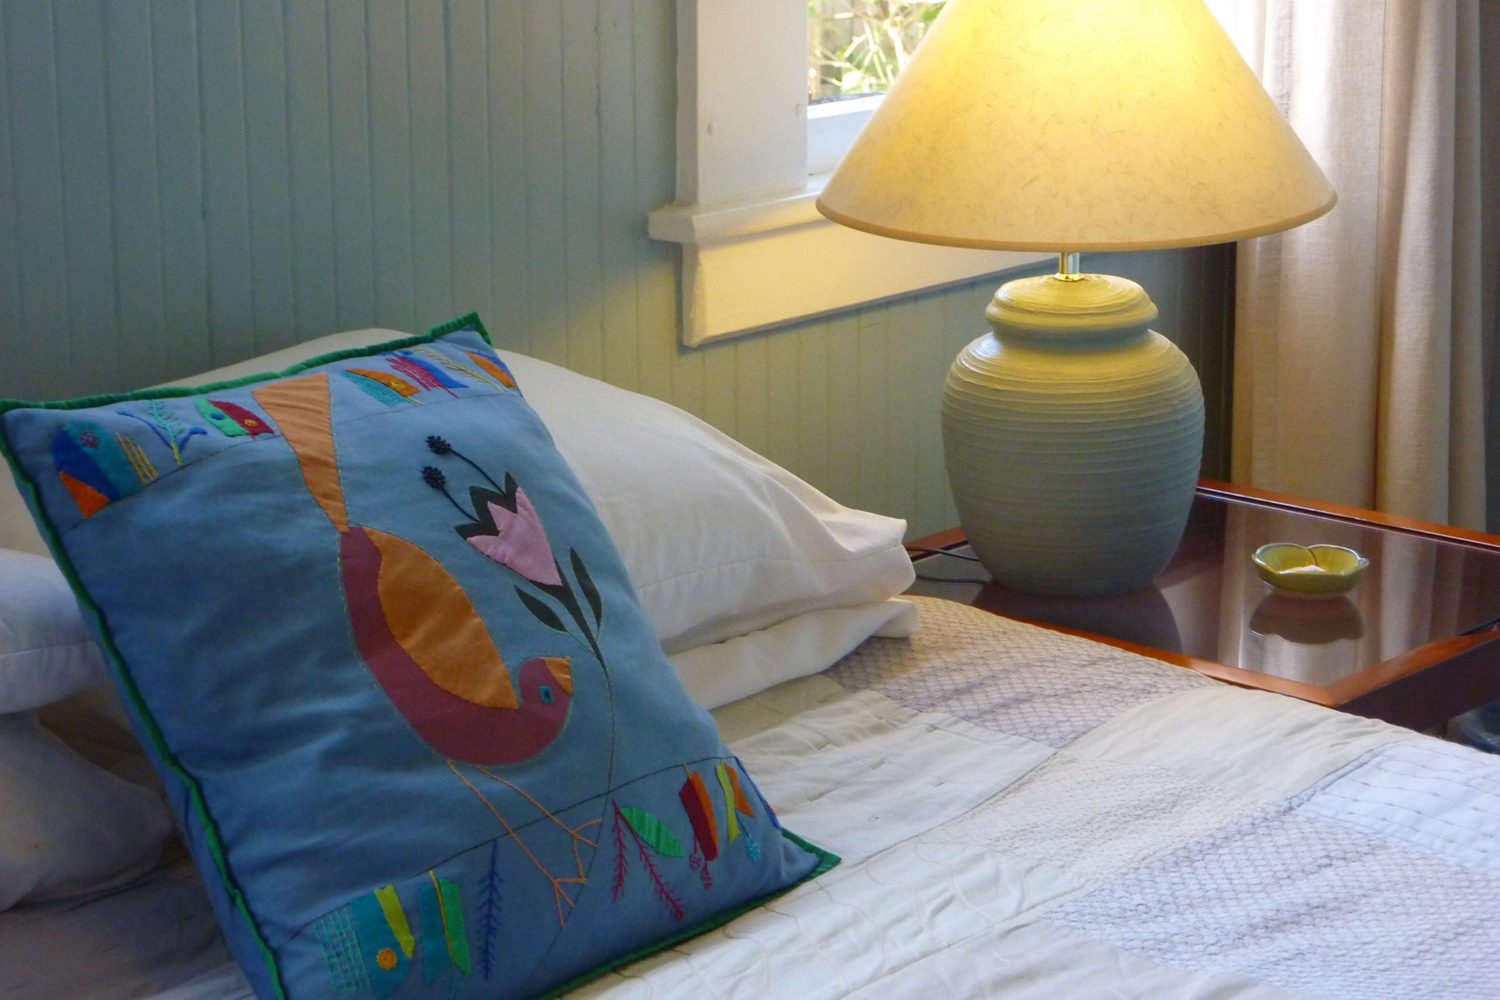 West Room Pillow, bed, nightstand and lamp close-up